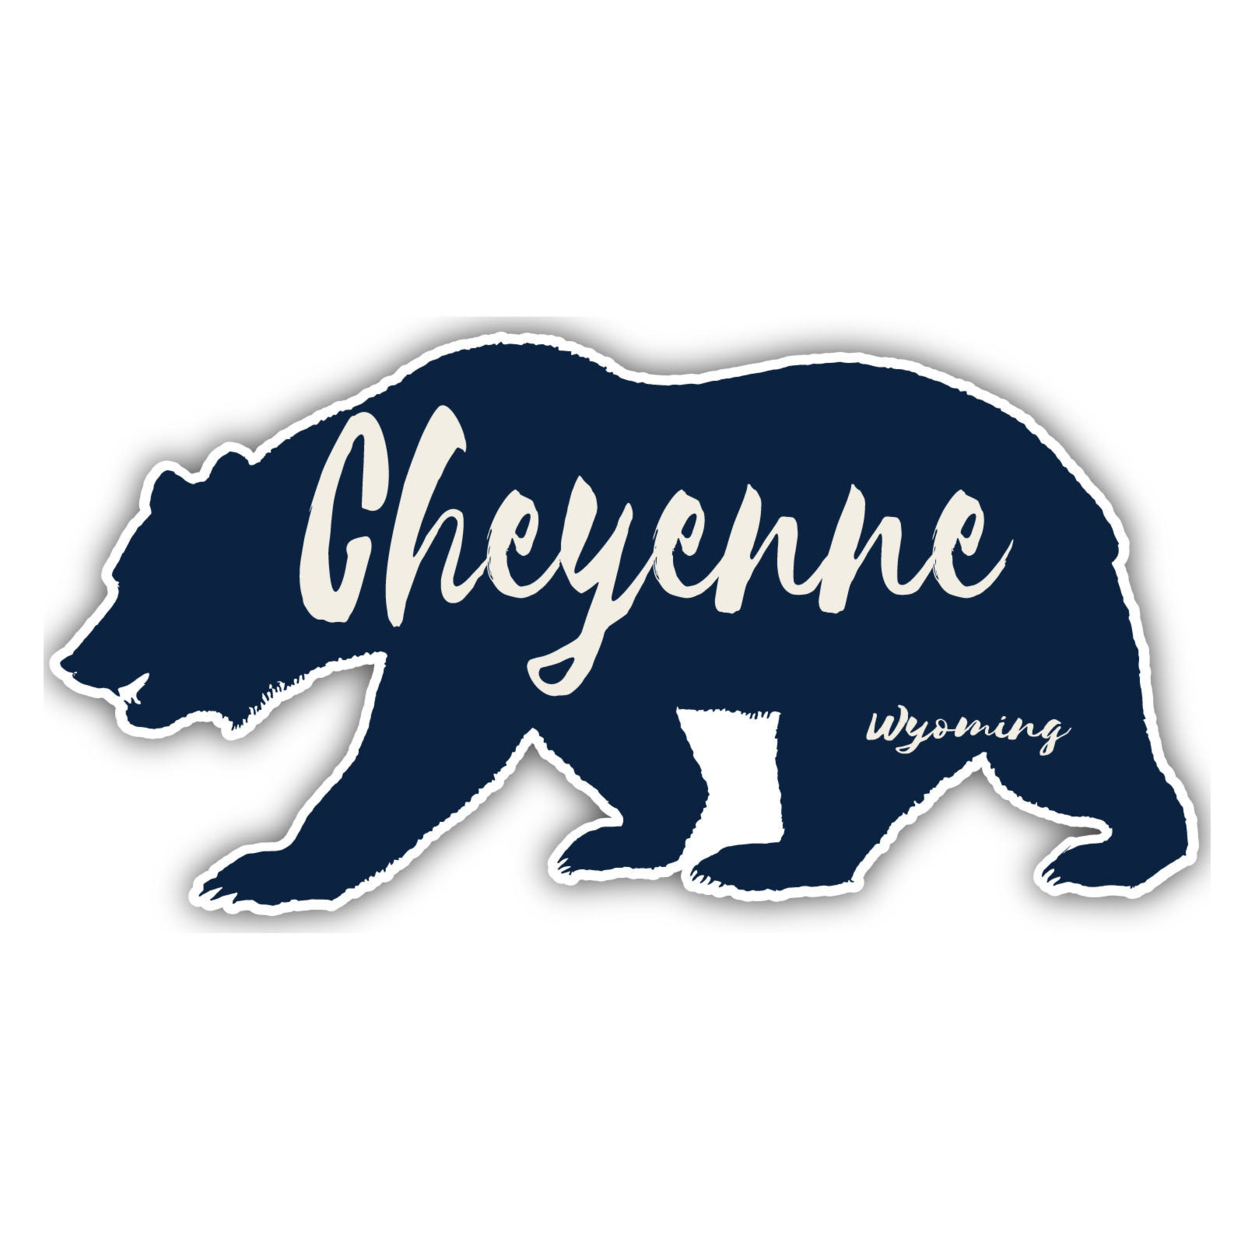 Cheyenne Wyoming Souvenir Decorative Stickers (Choose Theme And Size) - 4-Pack, 4-Inch, Bear